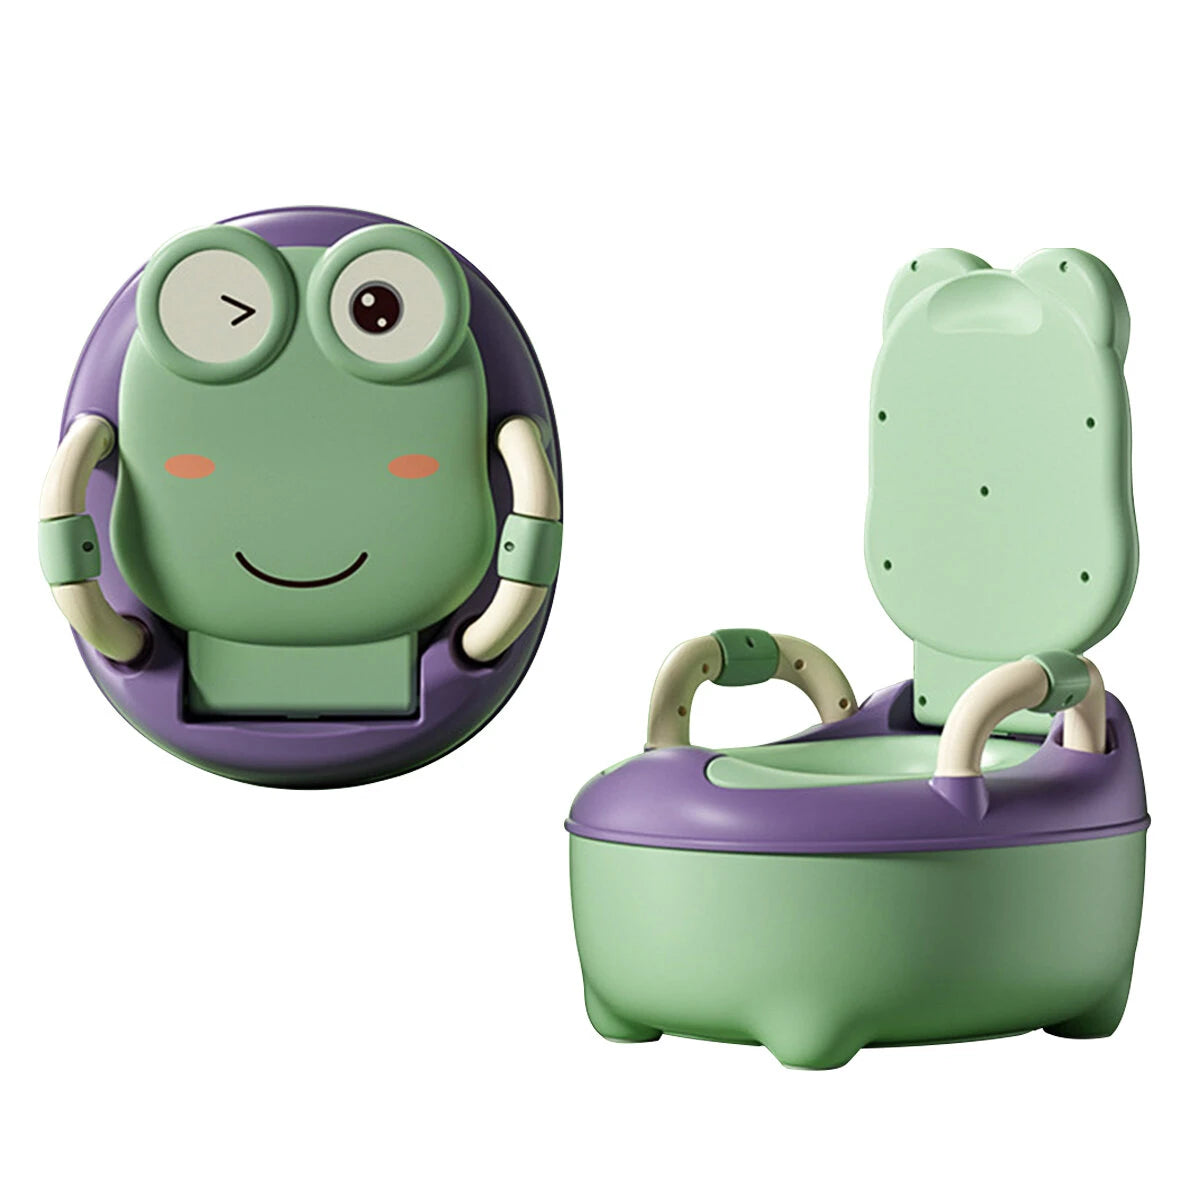 Portable Baby Potty Kids Children Training Toilet Trainer Stool With Cushion for 0-4 Years